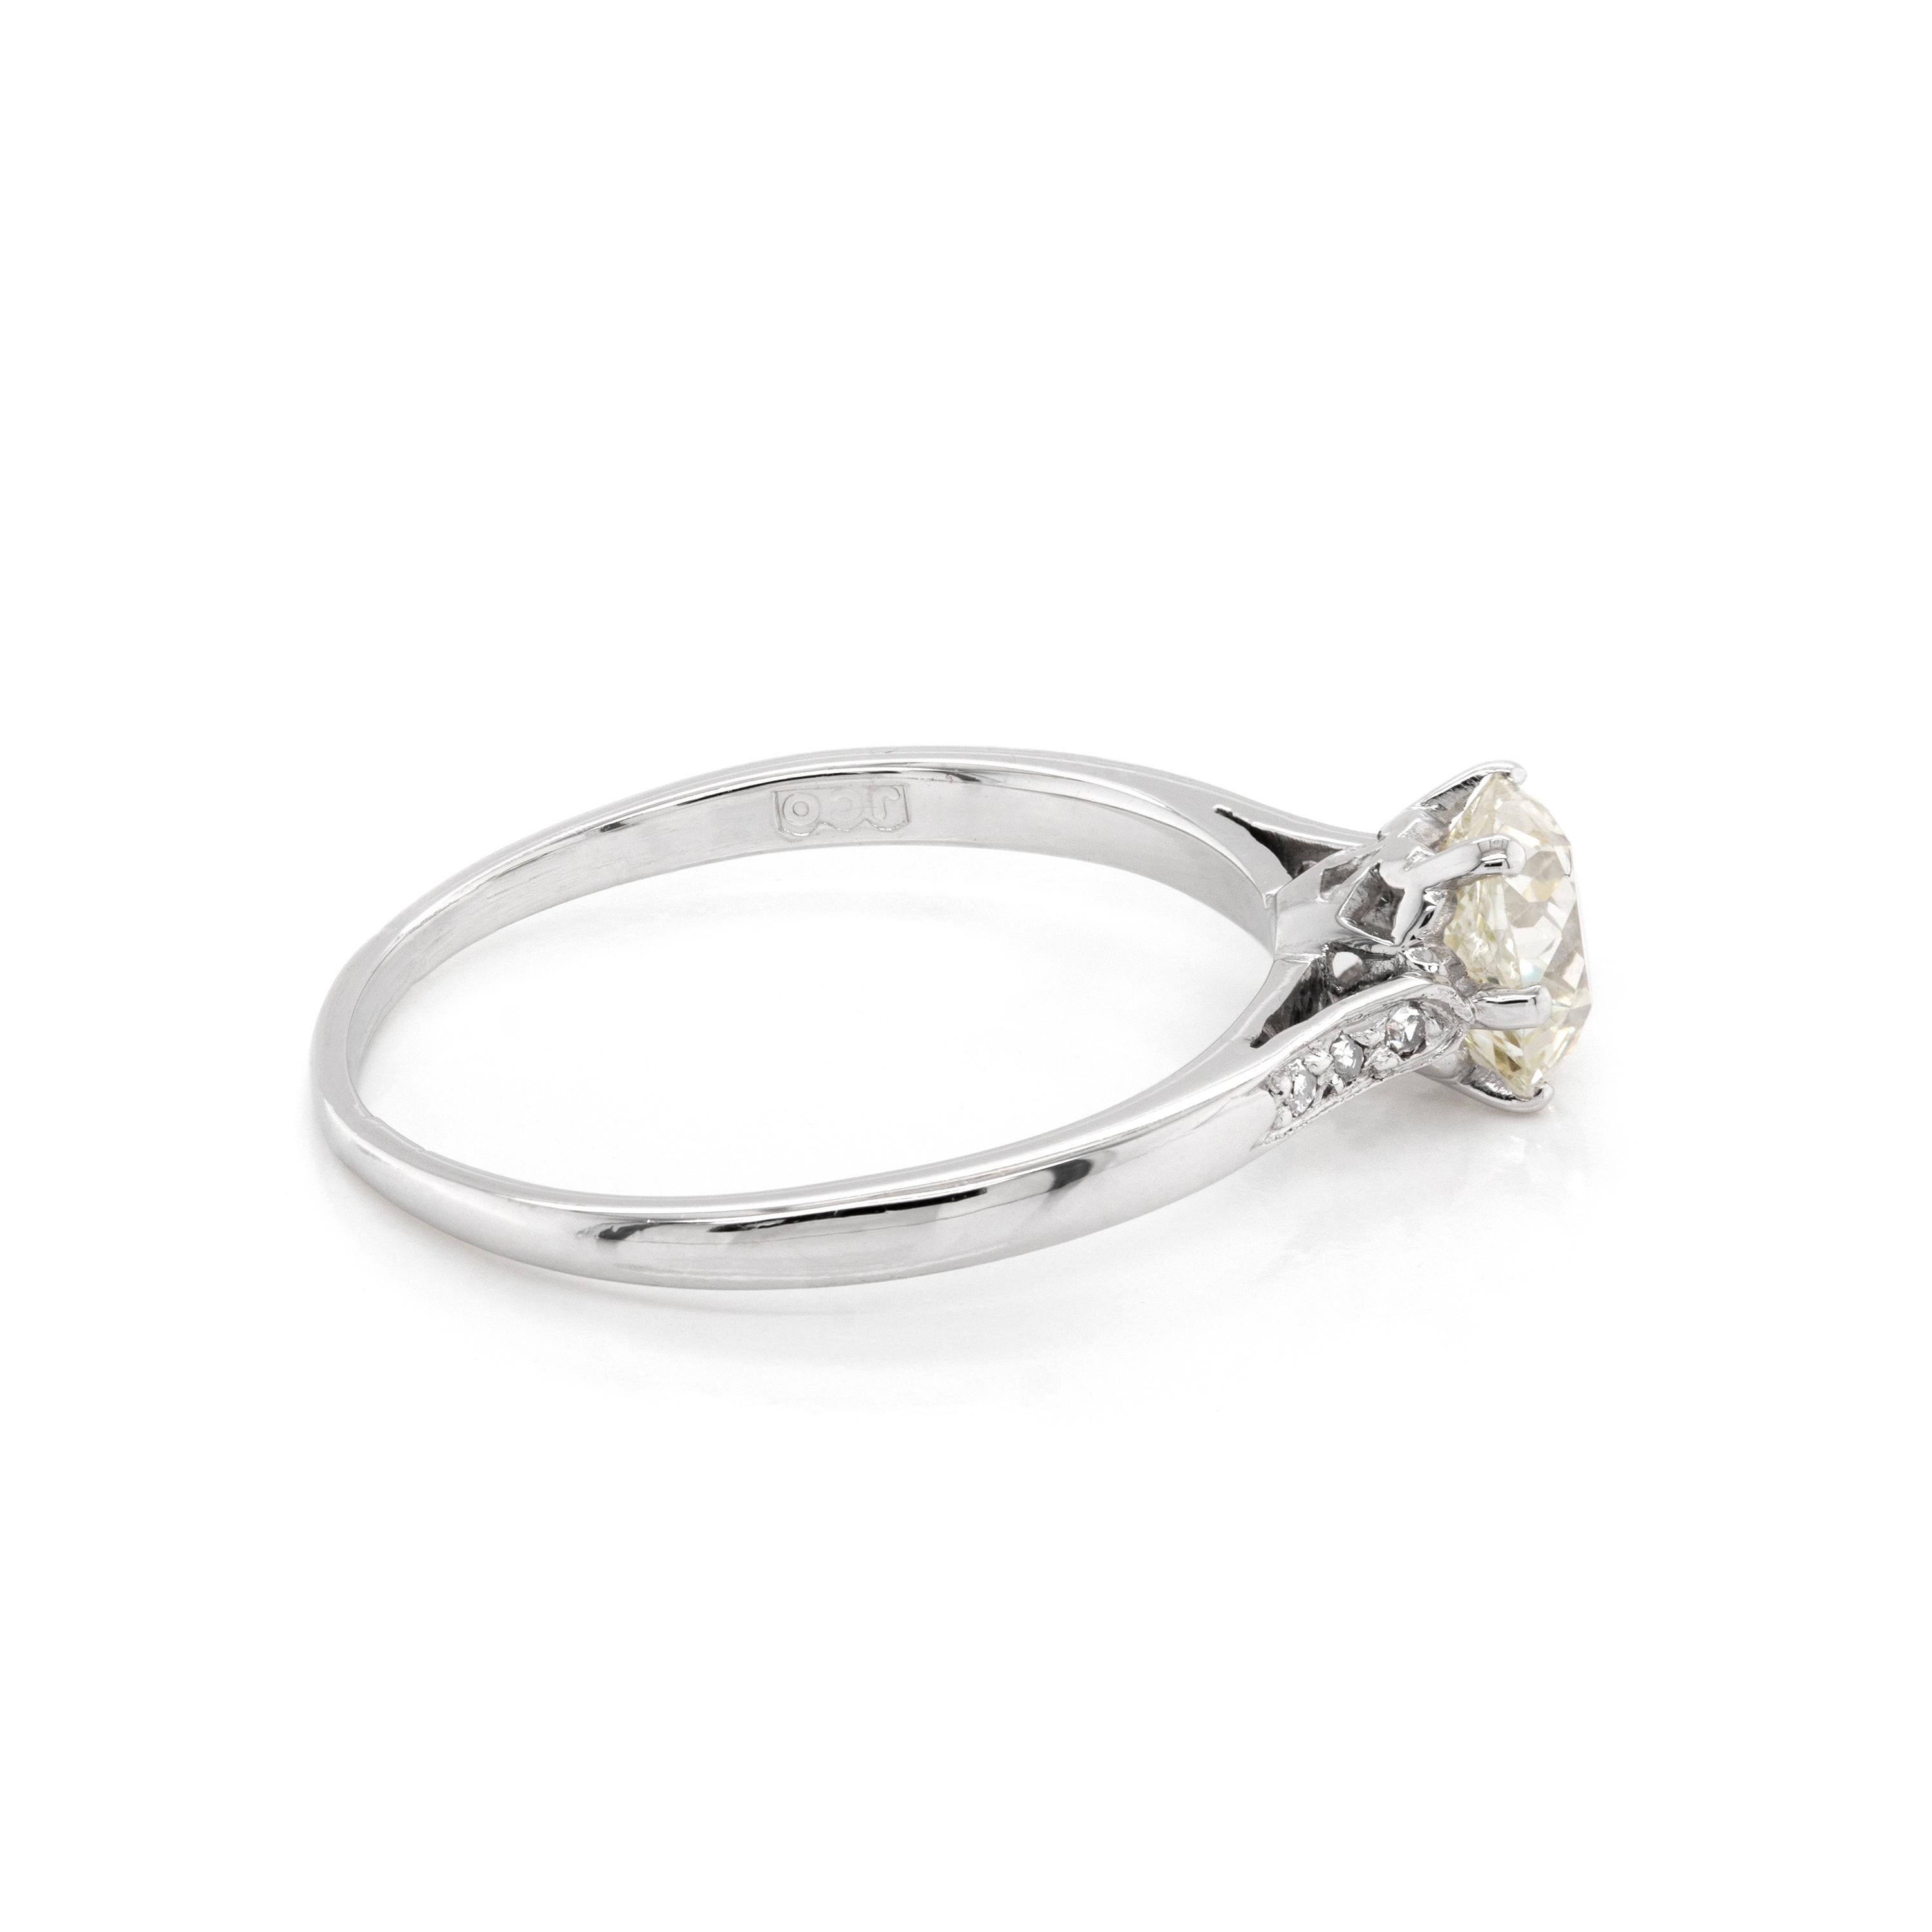 Engagement ring featuring a lively Victorian old mine cut diamond weighing 1.07 carat set in a 6 claw, open back setting. The diamond is beautifully accompanied by 3 grain set eight cut diamonds on either shoulder weighing approximately 0.06 carat